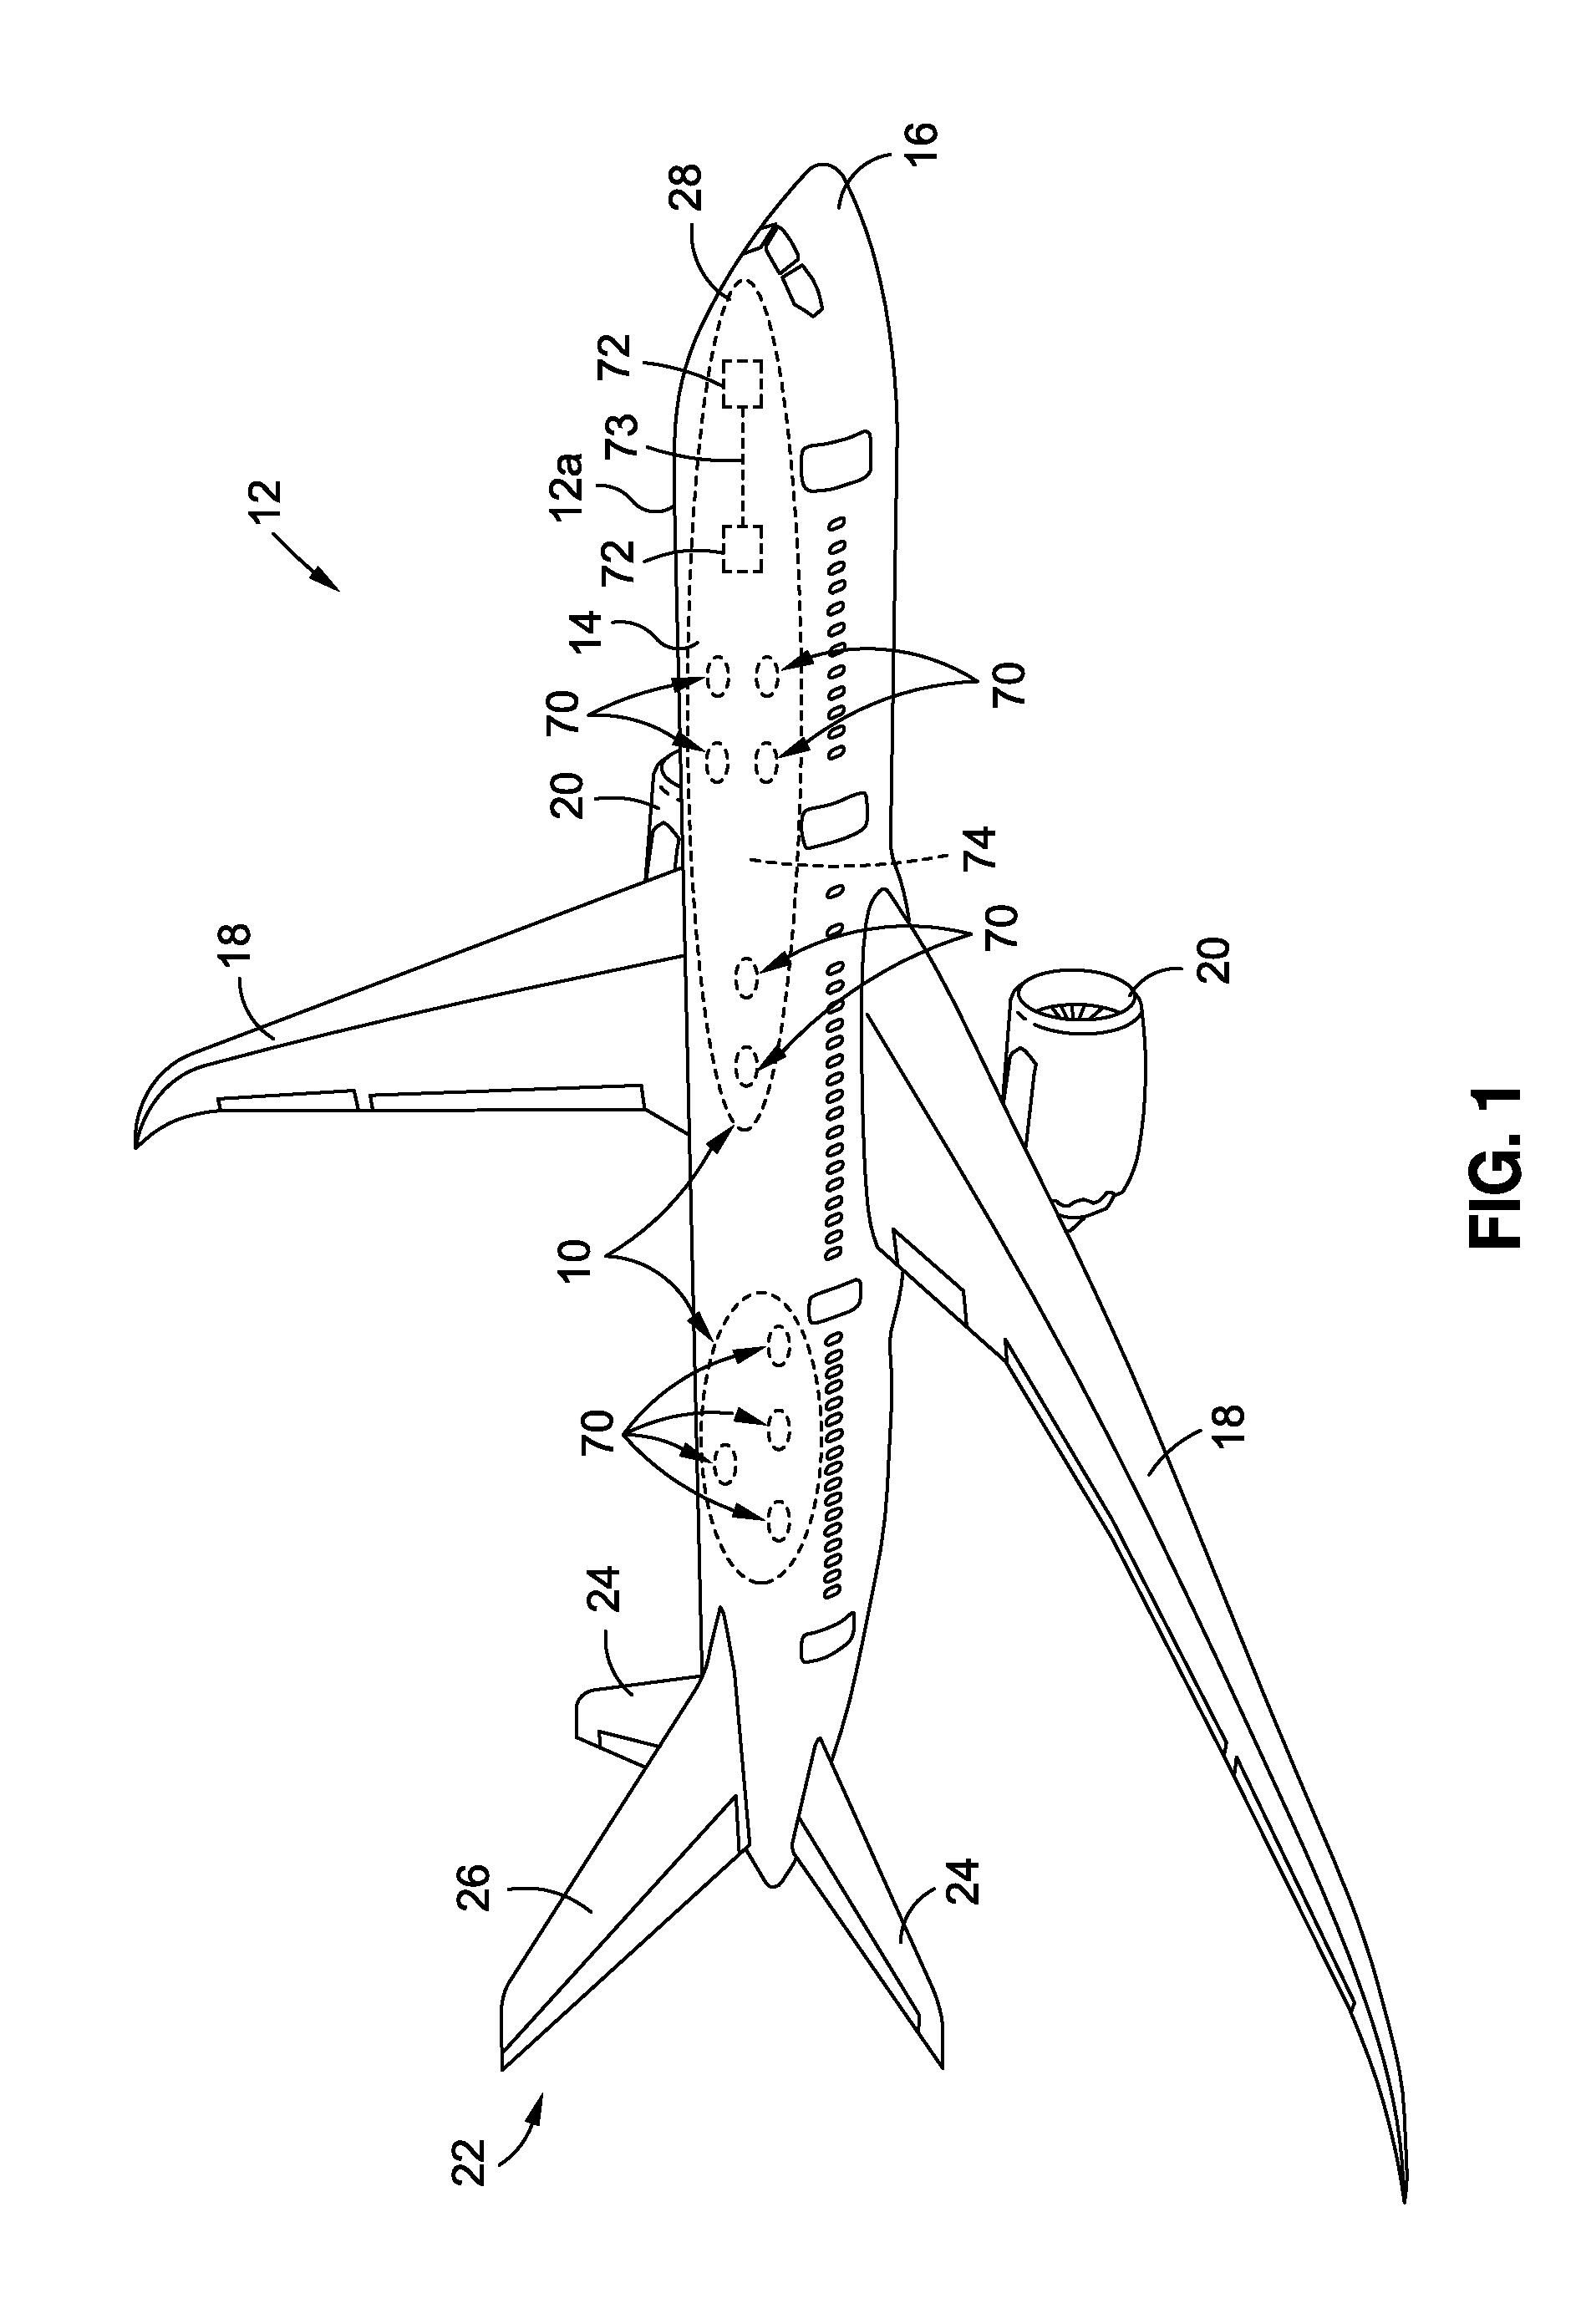 Method and system to enable selective smoke detection sensitivity